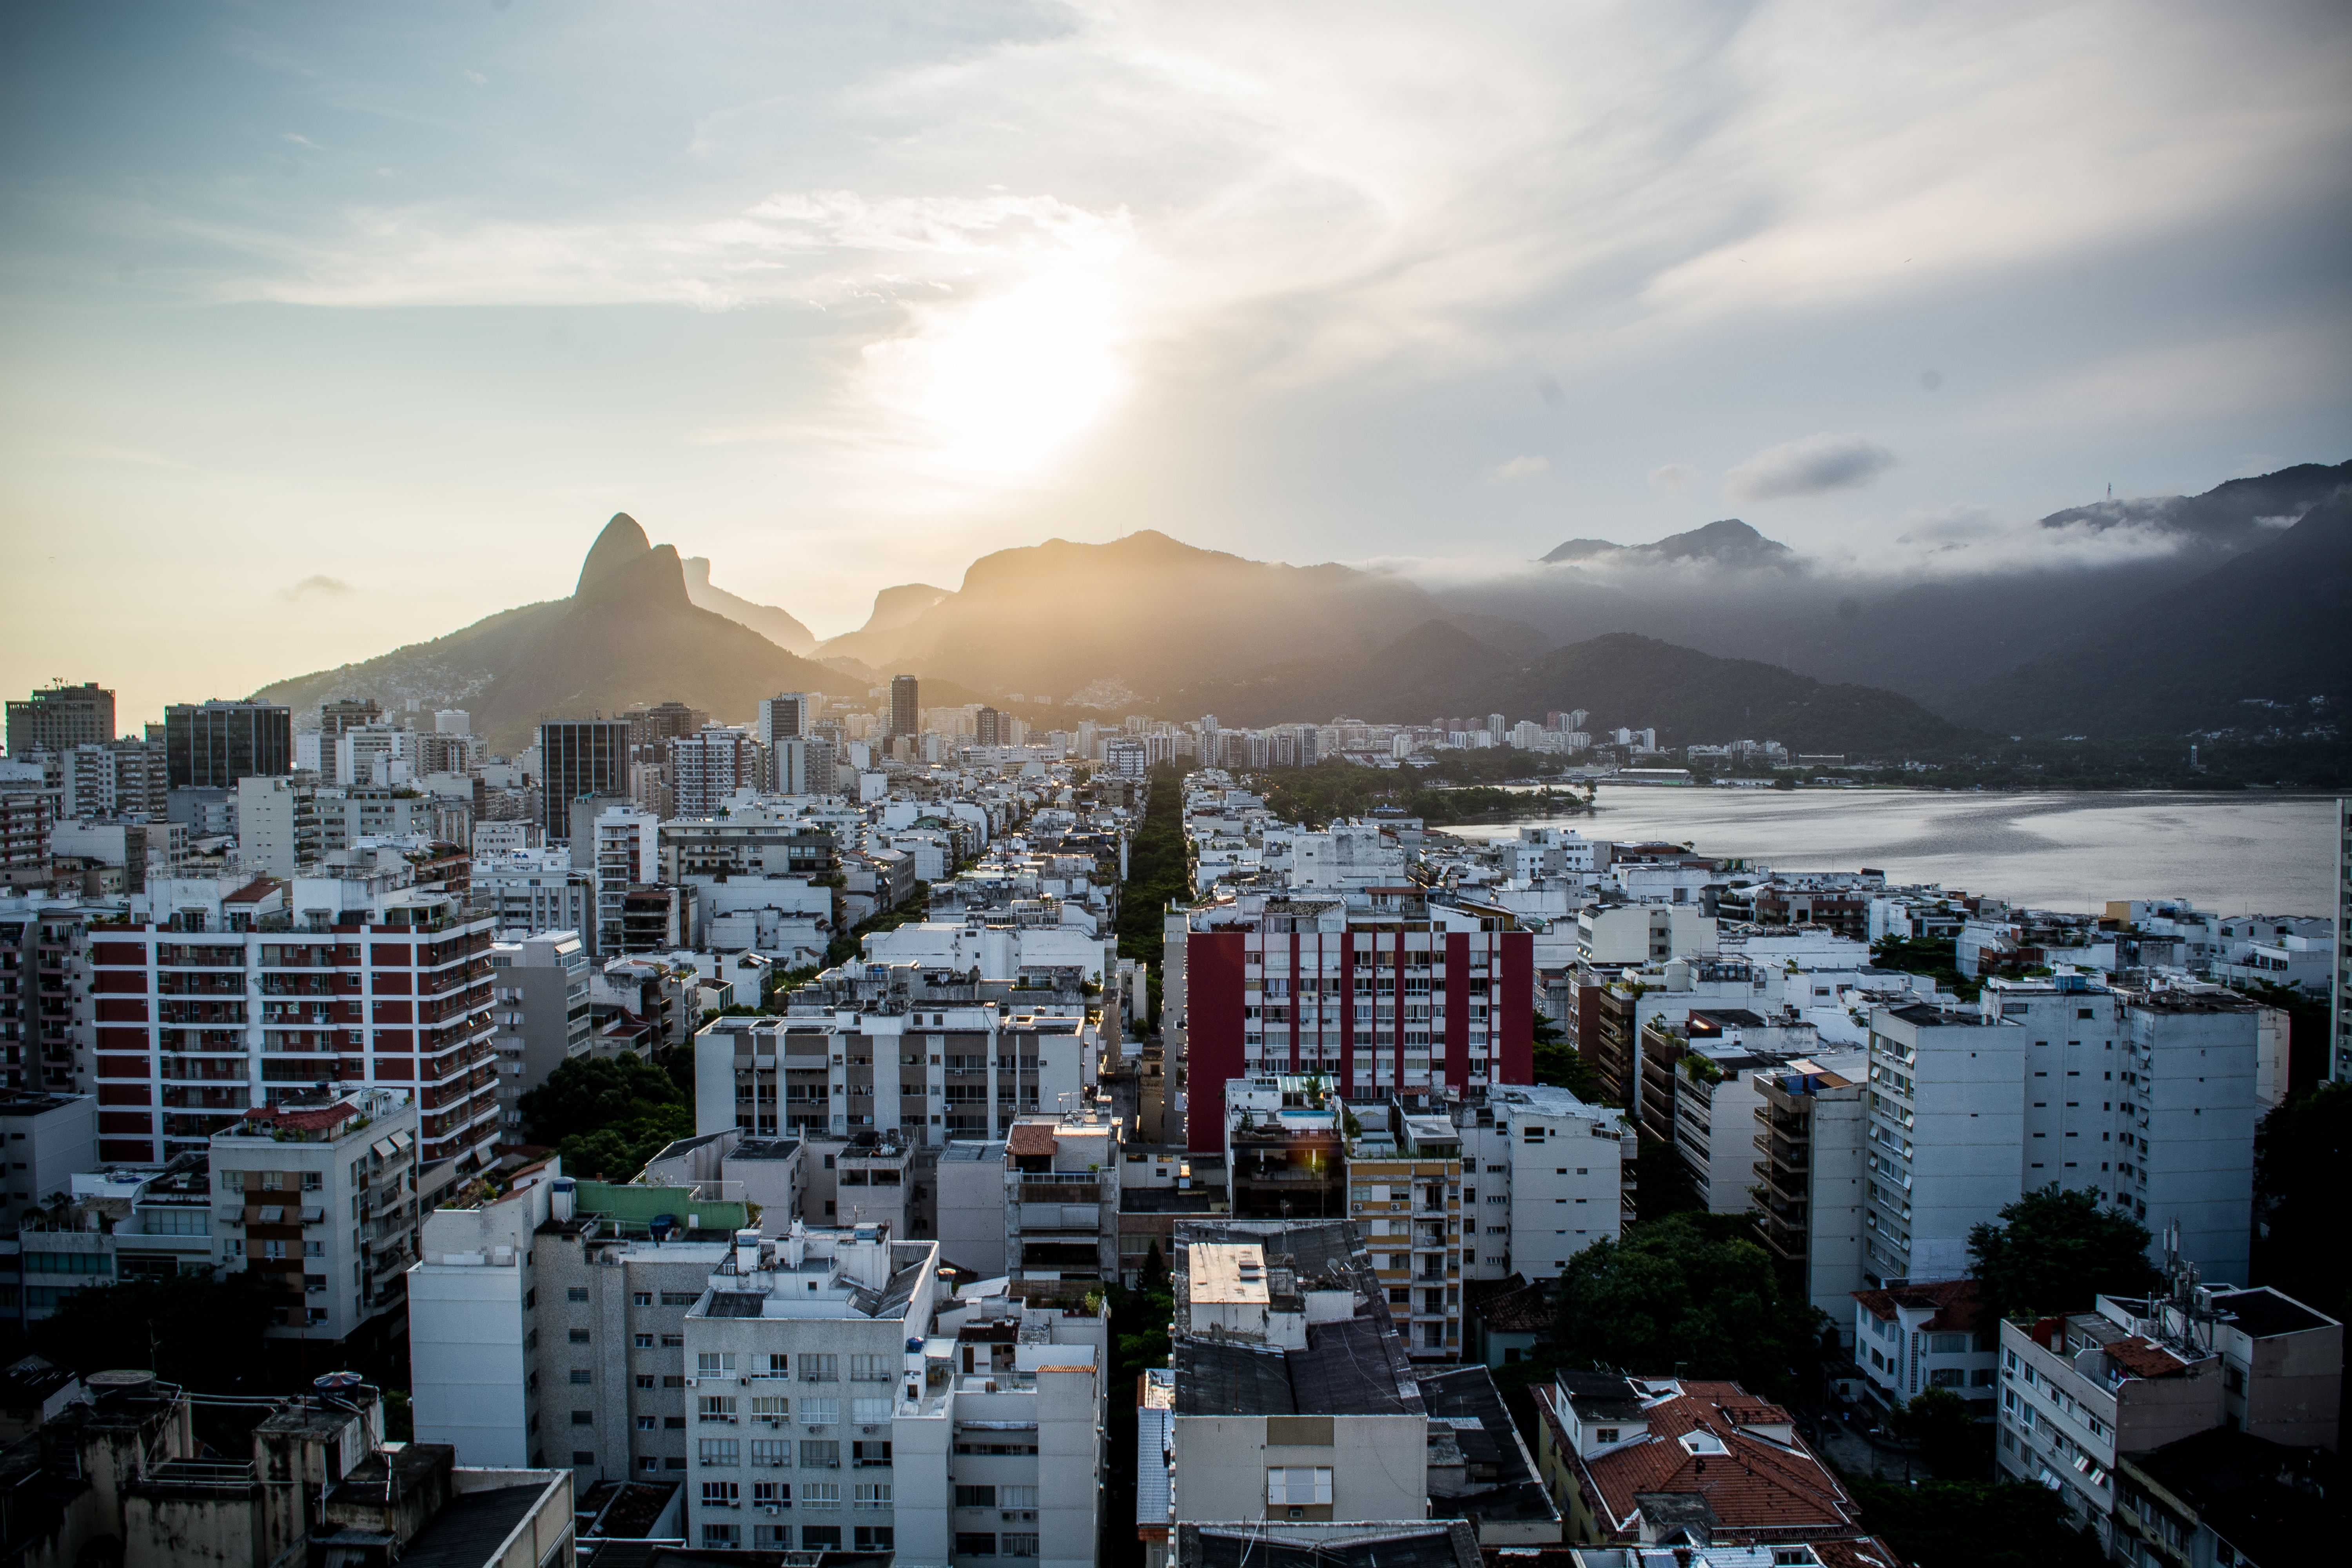 General 6000x4000 Rio de Janeiro city cityscape photography sunset mountains building urban architecture Sugarloaf Mountain